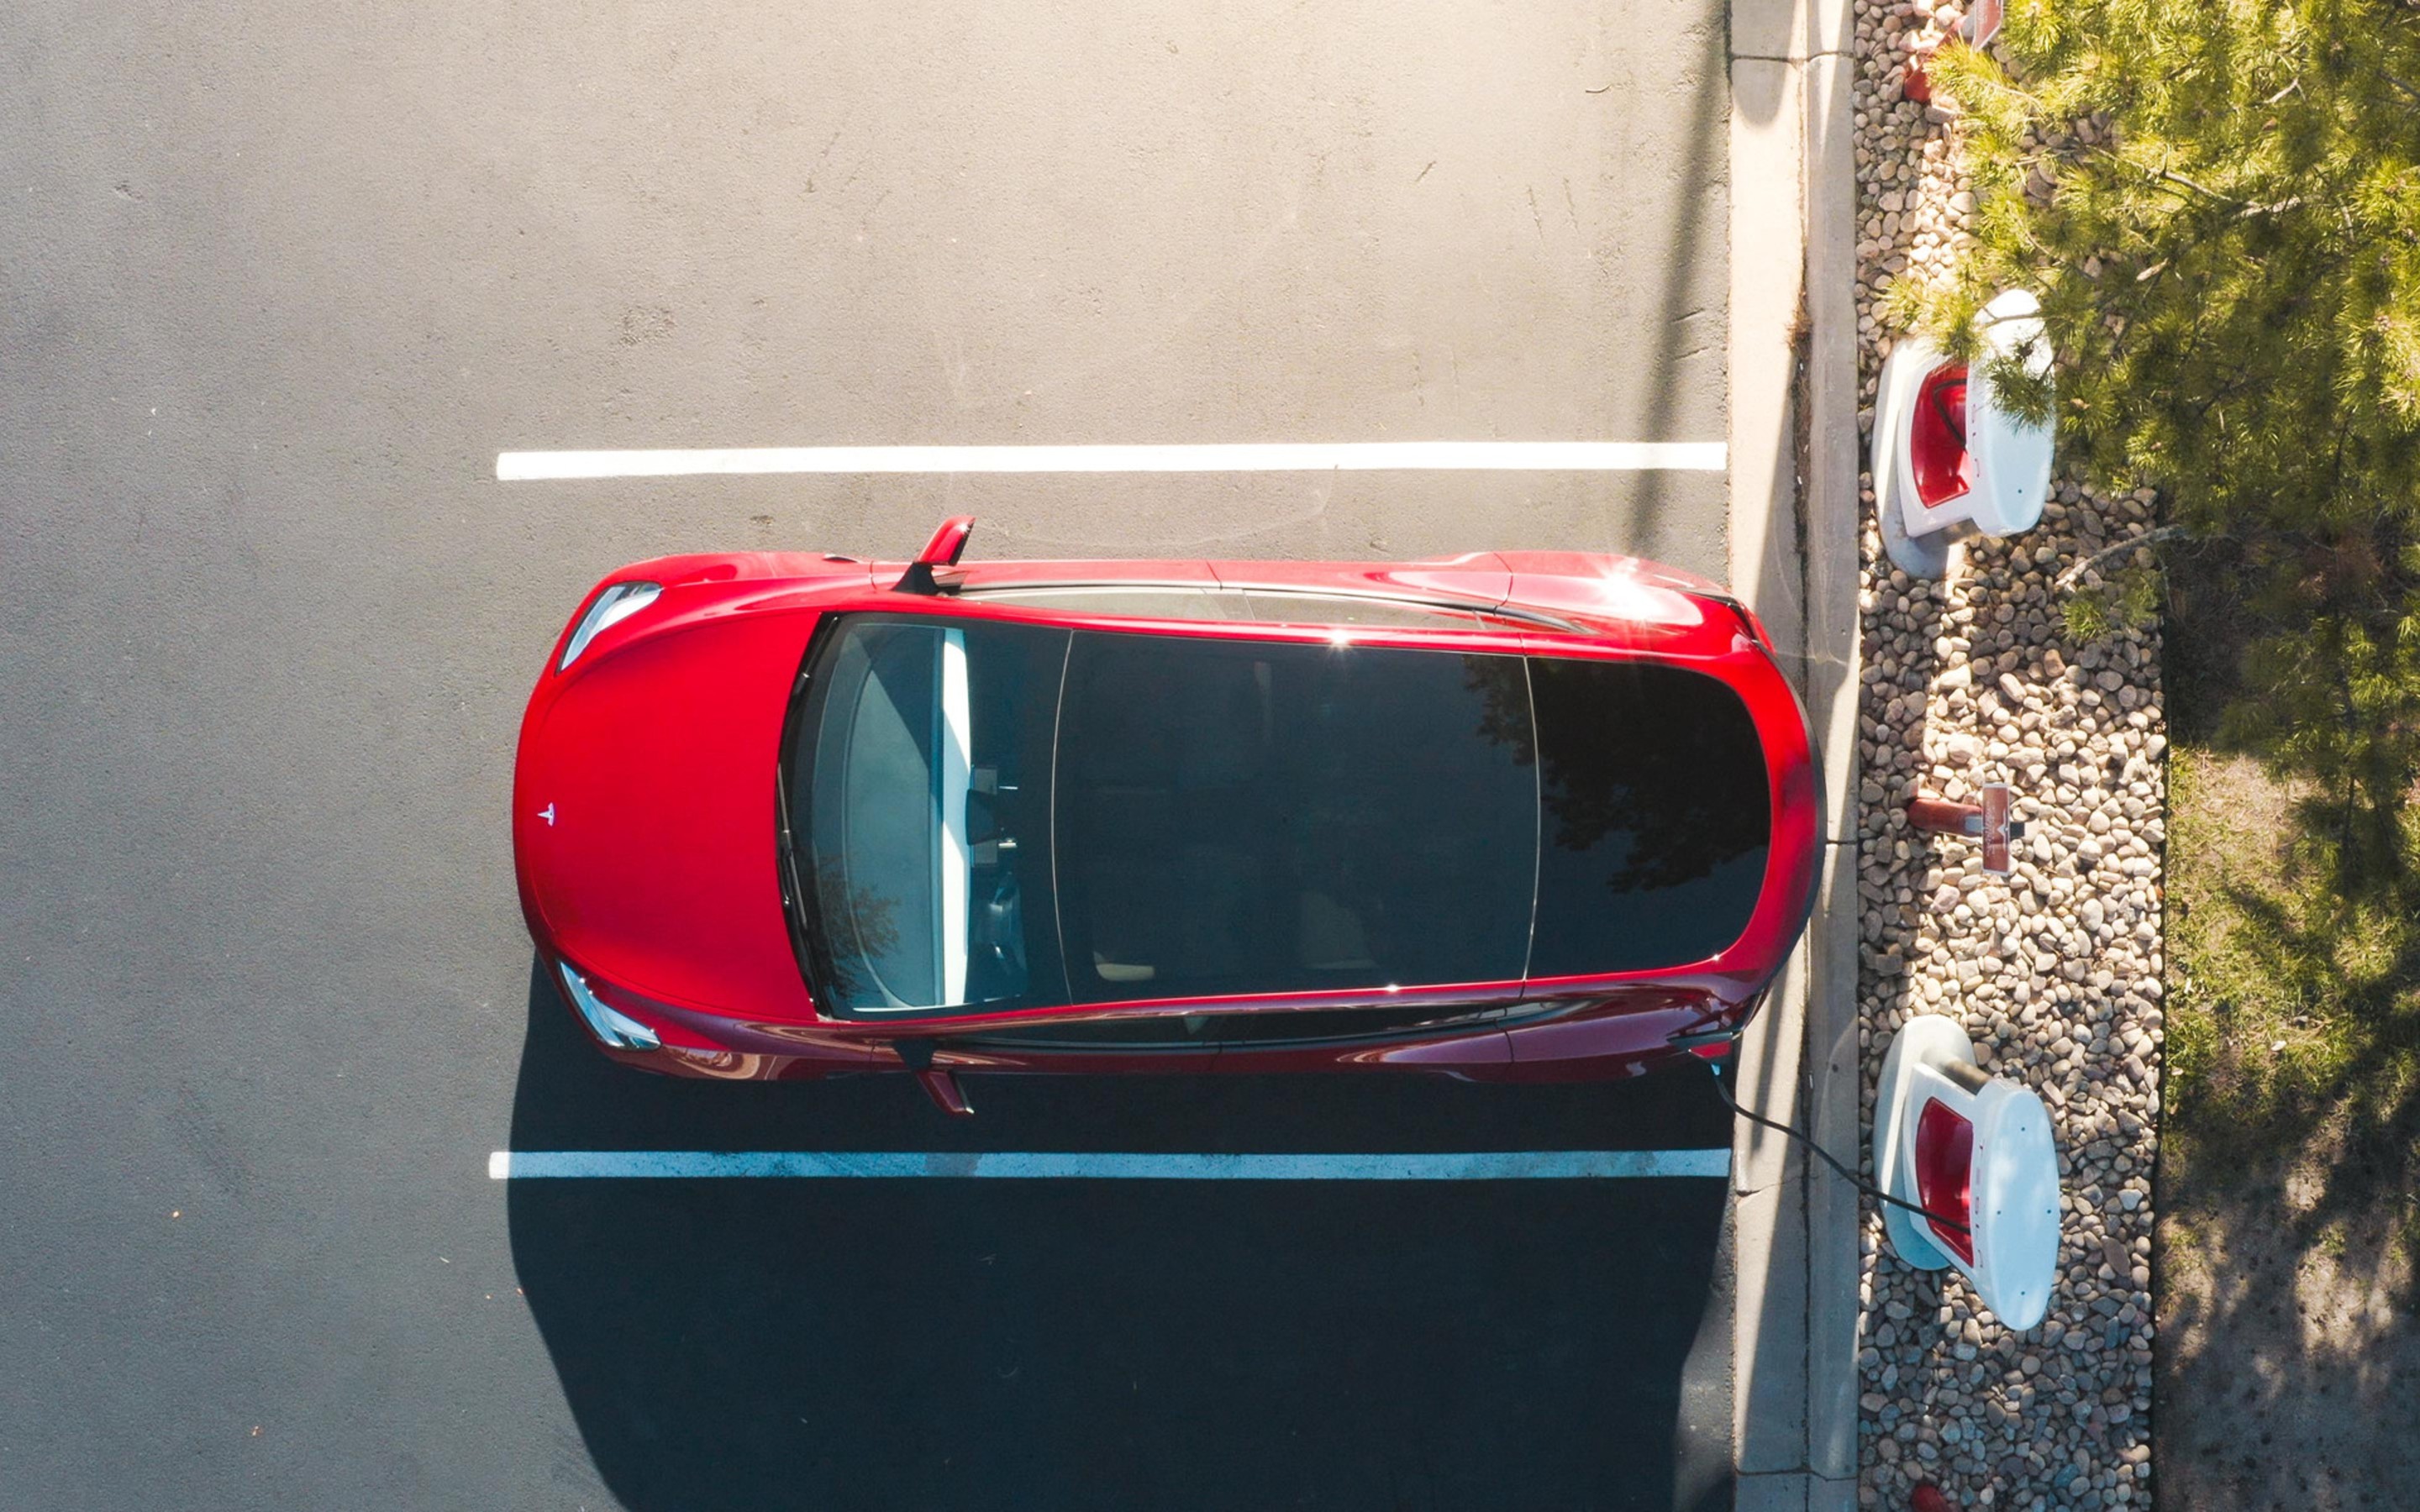 Birds-eye view of red Tesla charging via Supercharger